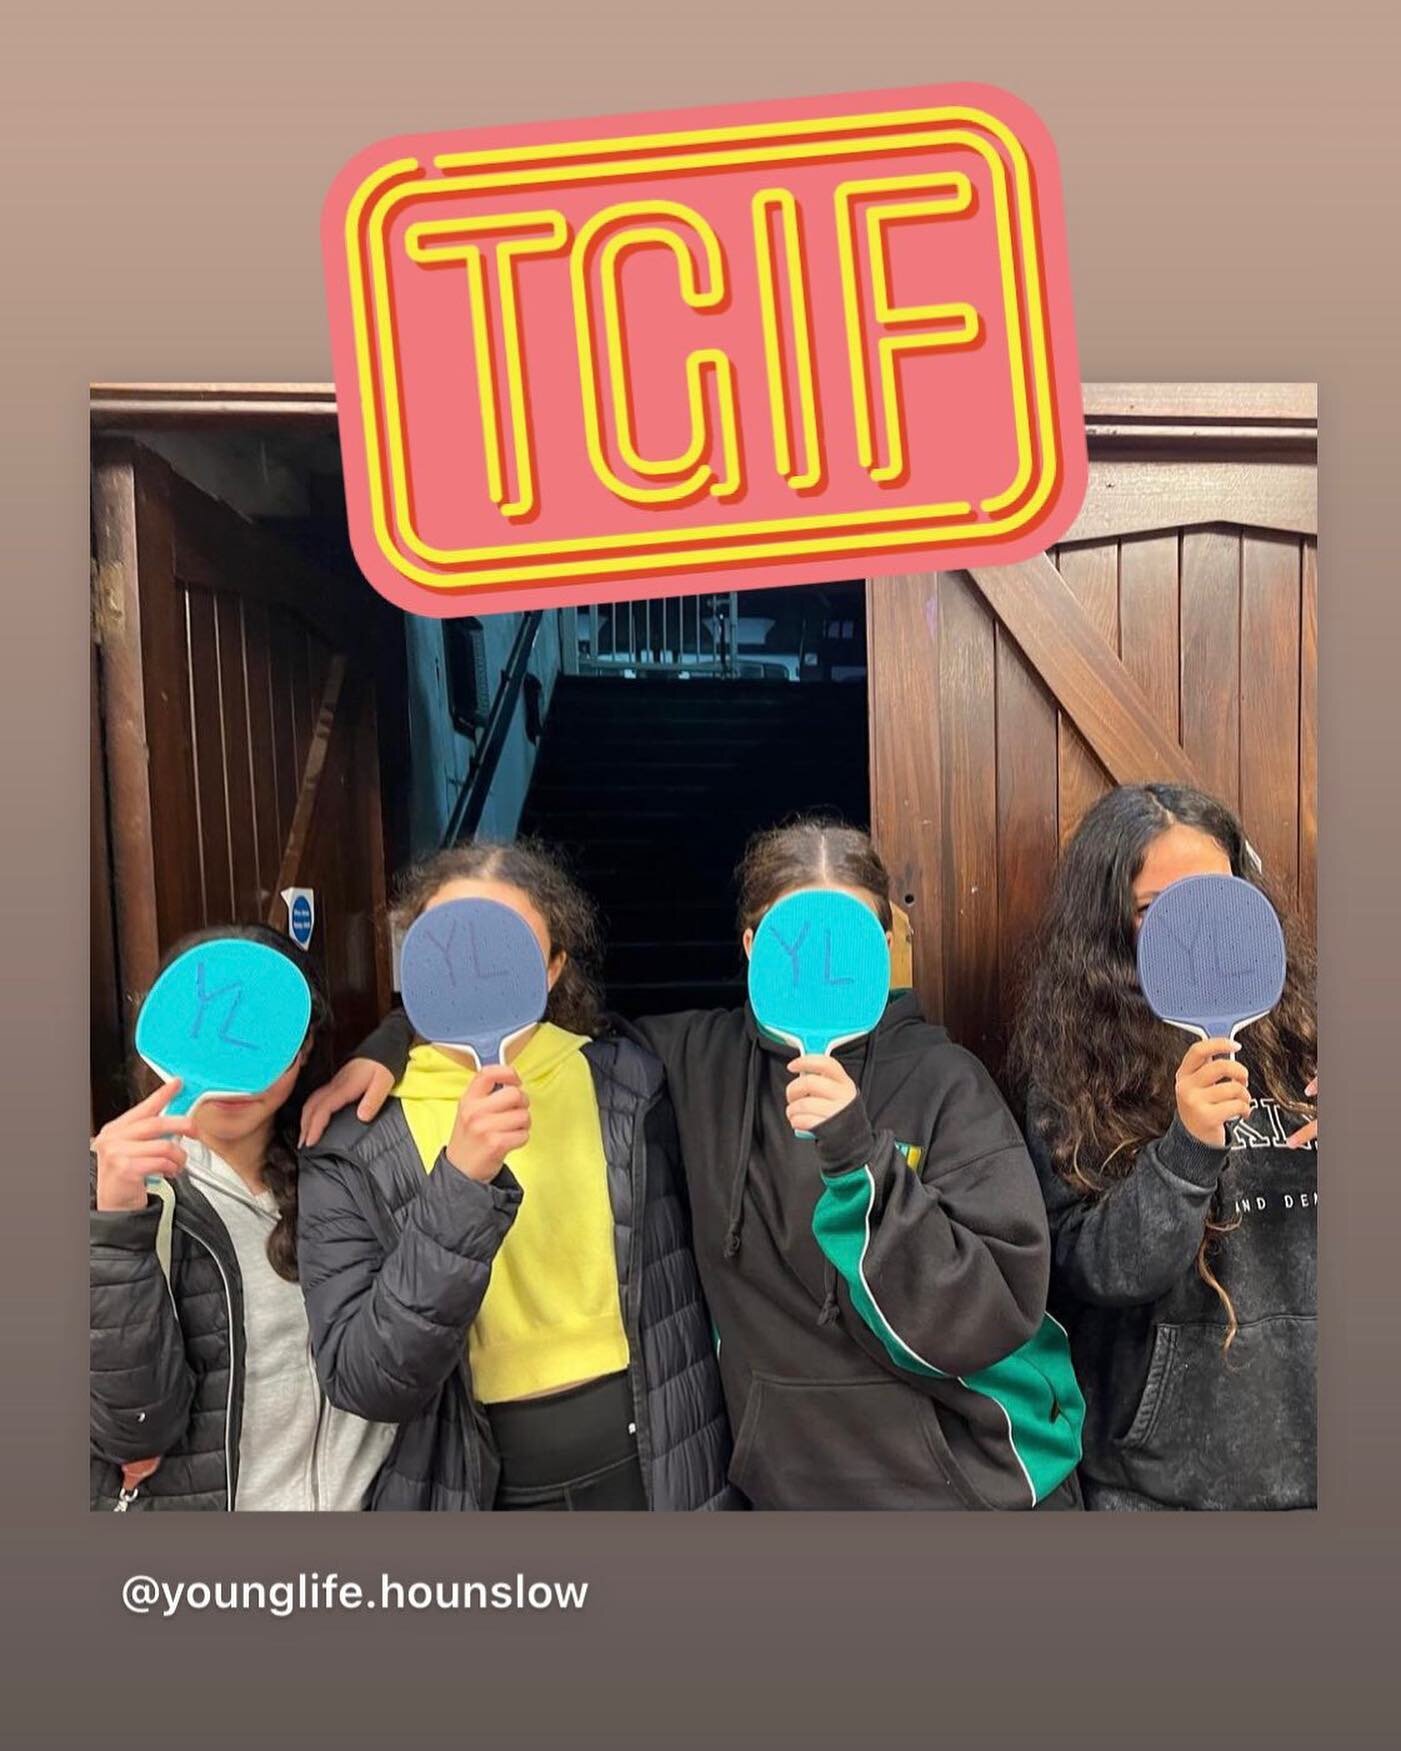 Loving partnering with @younglife to bring you Hounslow&rsquo;s newest youth club! 

@nlmasihghar @hounslowtownchurch @wearehthounslow  @younglife.hounslow 

#coolvibes #youthwork #pingpong #bubbletea #highstreet #hounslow